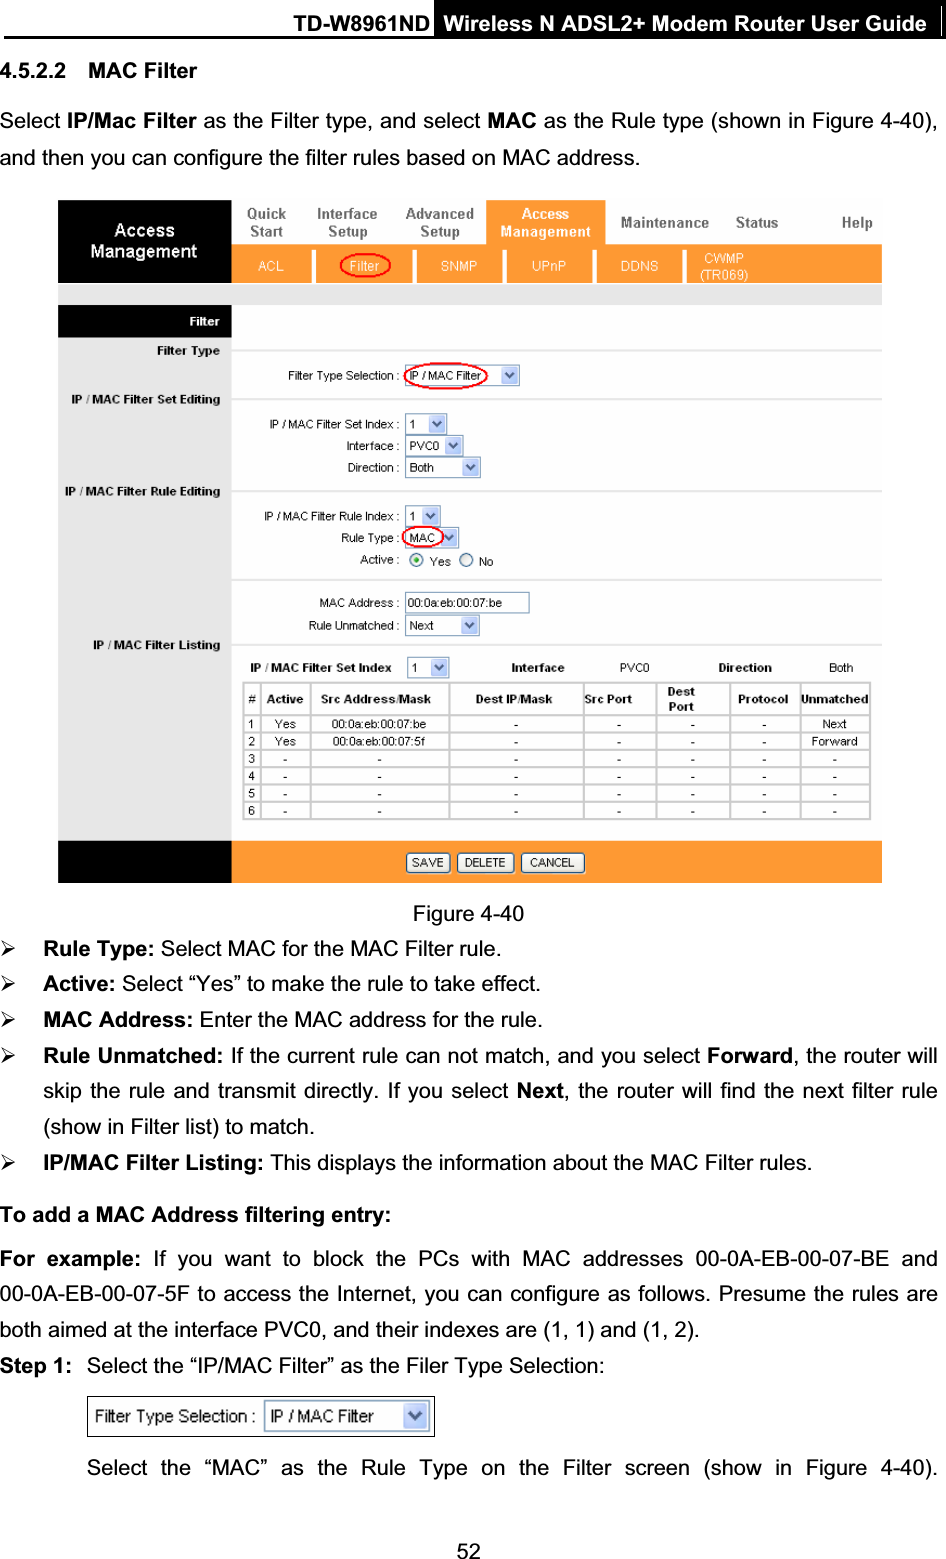 TD-W8961ND Wireless N ADSL2+ Modem Router User Guide524.5.2.2 MAC Filter Select IP/Mac Filter as the Filter type, and select MAC as the Rule type (shown in Figure 4-40),and then you can configure the filter rules based on MAC address. Figure 4-40 ¾Rule Type: Select MAC for the MAC Filter rule.¾Active: Select “Yes” to make the rule to take effect.¾MAC Address: Enter the MAC address for the rule. ¾Rule Unmatched: If the current rule can not match, and you select Forward, the router will skip the rule and transmit directly. If you select Next, the router will find the next filter rule (show in Filter list) to match.¾IP/MAC Filter Listing: This displays the information about the MAC Filter rules.To add a MAC Address filtering entry: For example: If you want to block the PCs with MAC addresses 00-0A-EB-00-07-BE and 00-0A-EB-00-07-5F to access the Internet, you can configure as follows. Presume the rules are both aimed at the interface PVC0, and their indexes are (1, 1) and (1, 2).Step 1:  Select the “IP/MAC Filter” as the Filer Type Selection:   Select the “MAC” as the Rule Type on the Filter screen (show in Figure 4-40).